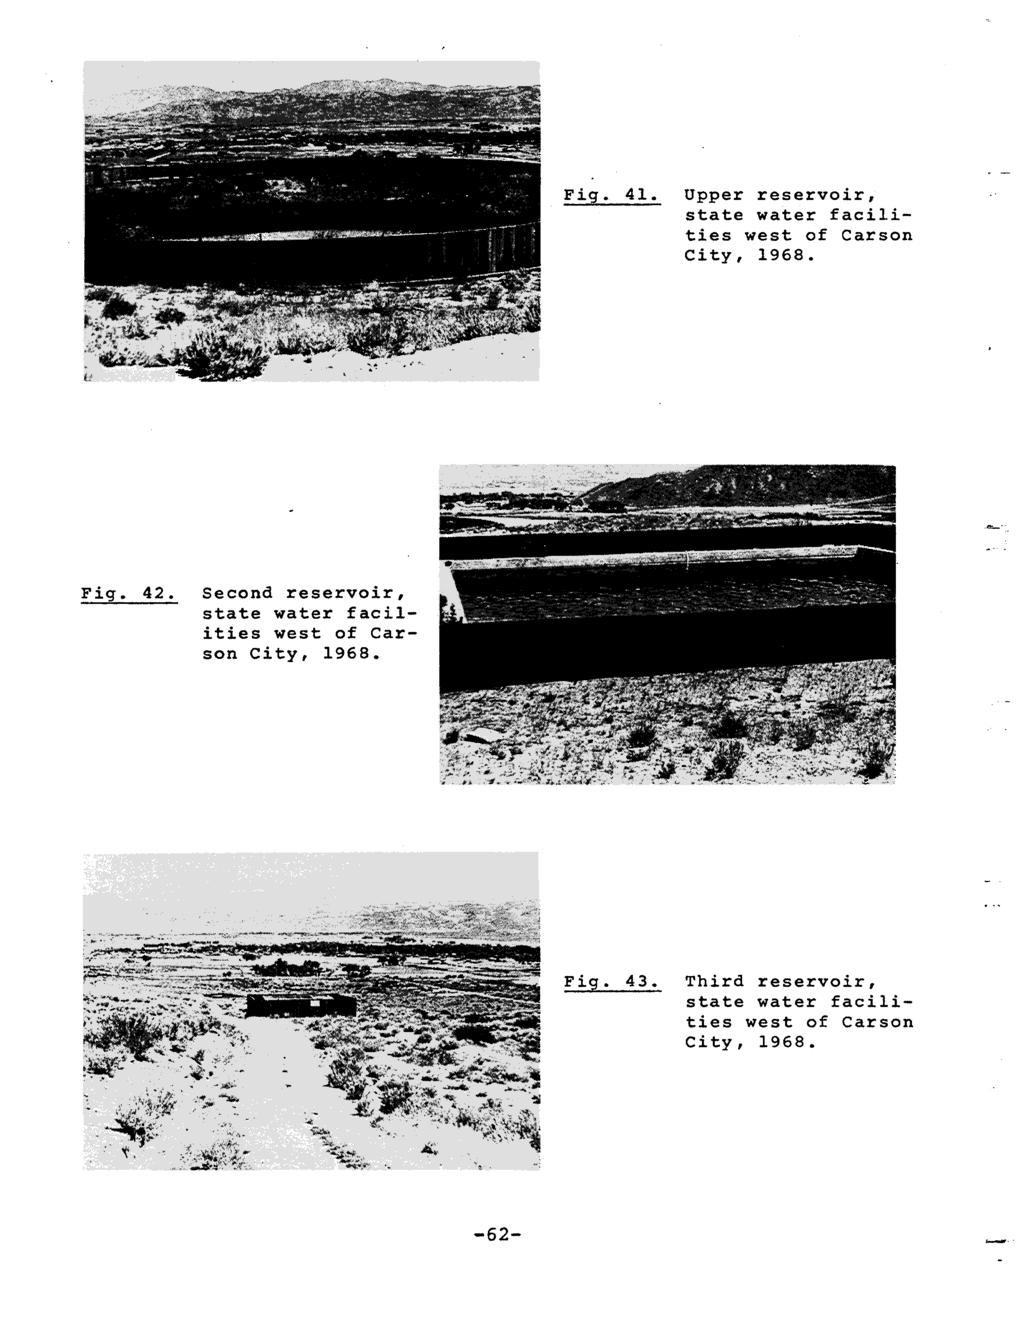 Fig. 41. Upper reservoir, state water facilities west of Carson City, 1968. Fig. 42.